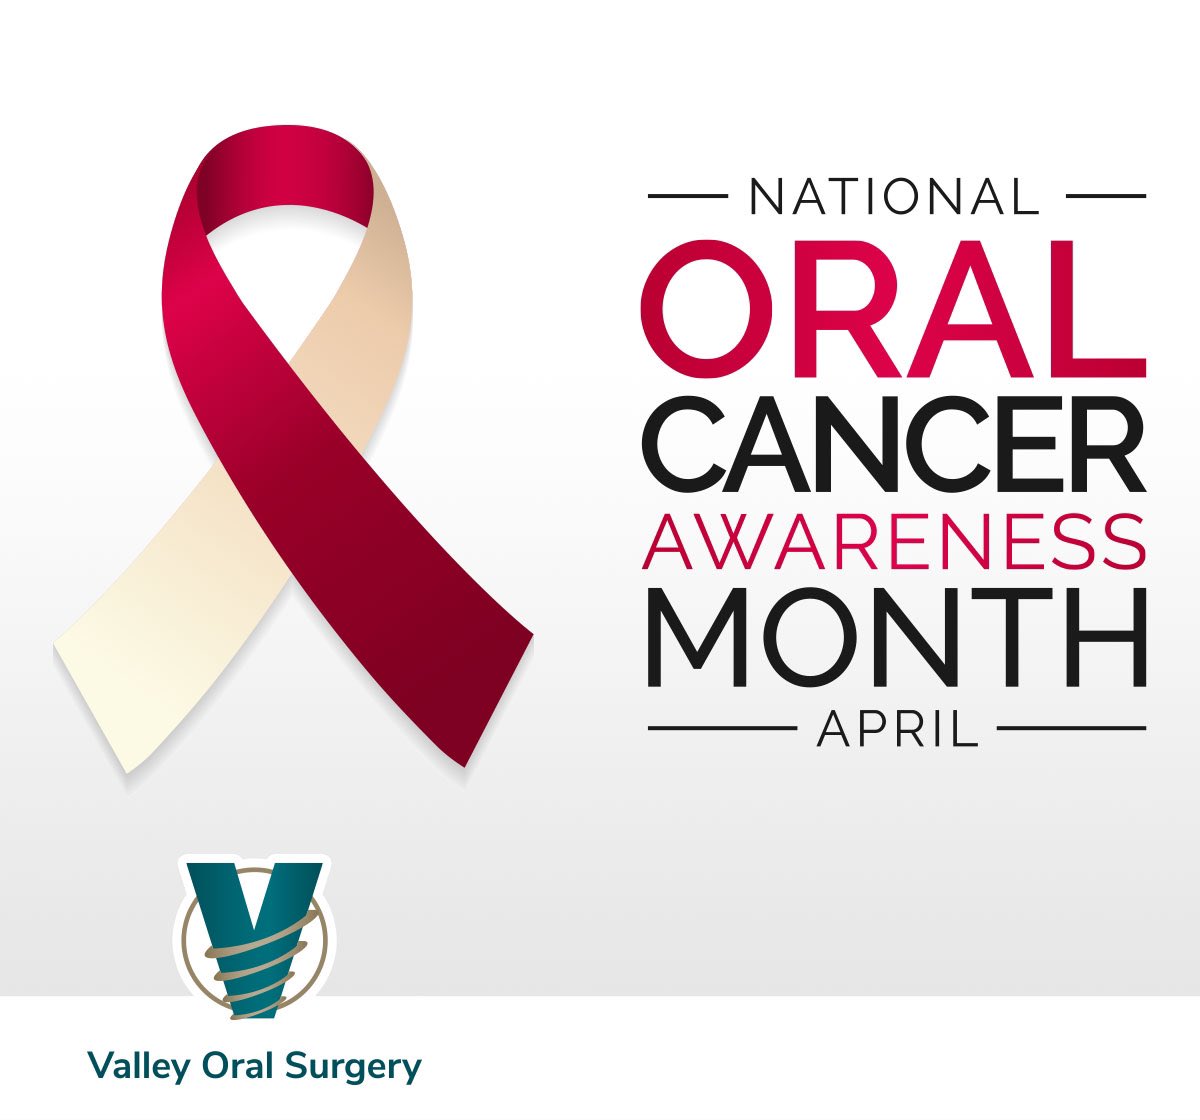 🎗️ April is Oral Cancer Awareness Month. Early detection saves lives. VOS encourages everyone to schedule a screening this month. Your health is your wealth, and awareness is the first step to prevention. #OralCancerAwareness #GetScreened